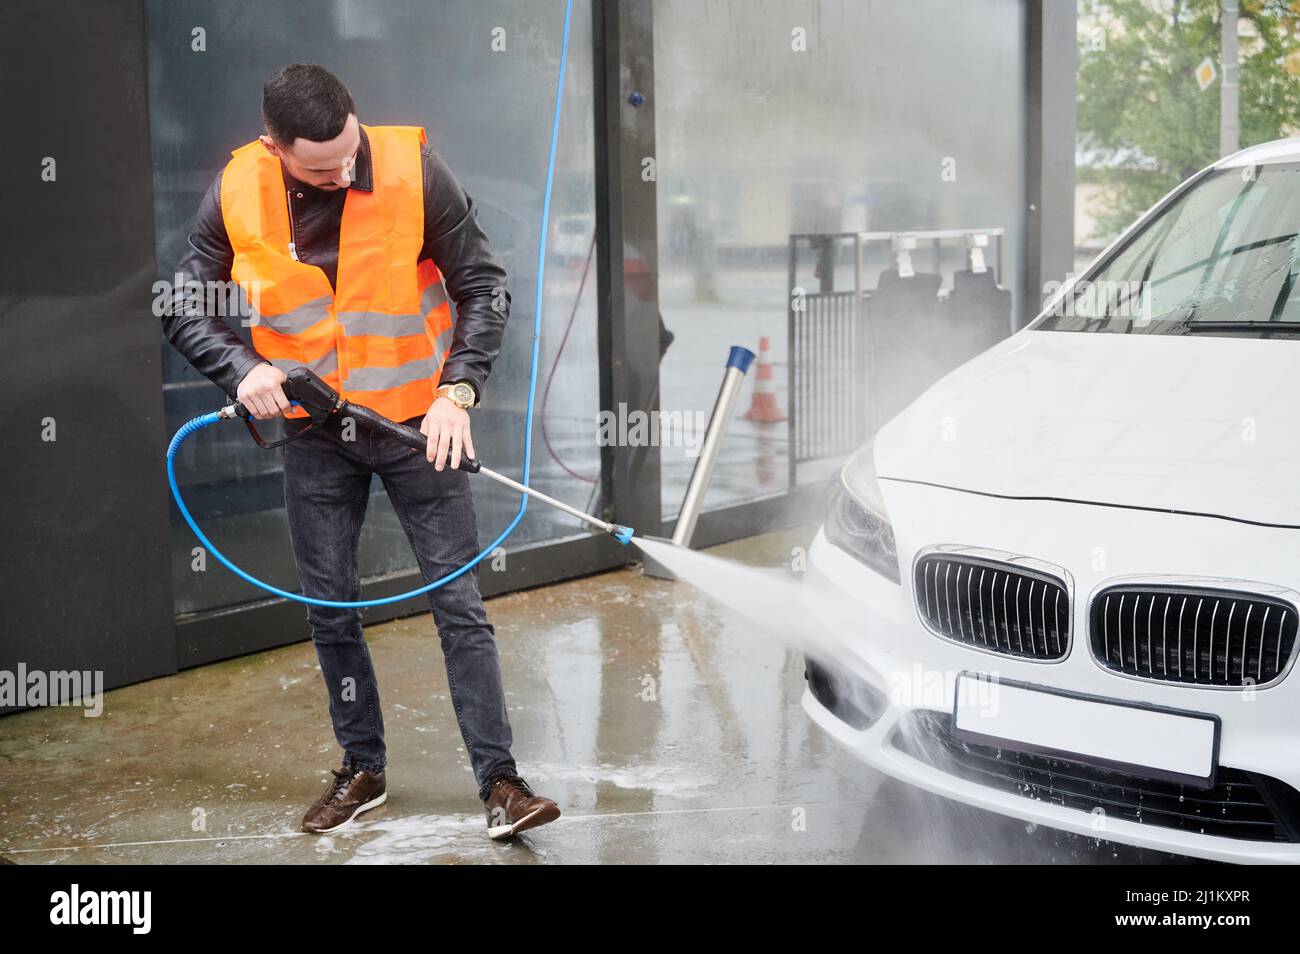 Young man washing car on carwash station outdoor, wearing orange vest. Handsome worker cleaning white automobile, using high pressure water. Stock Photo